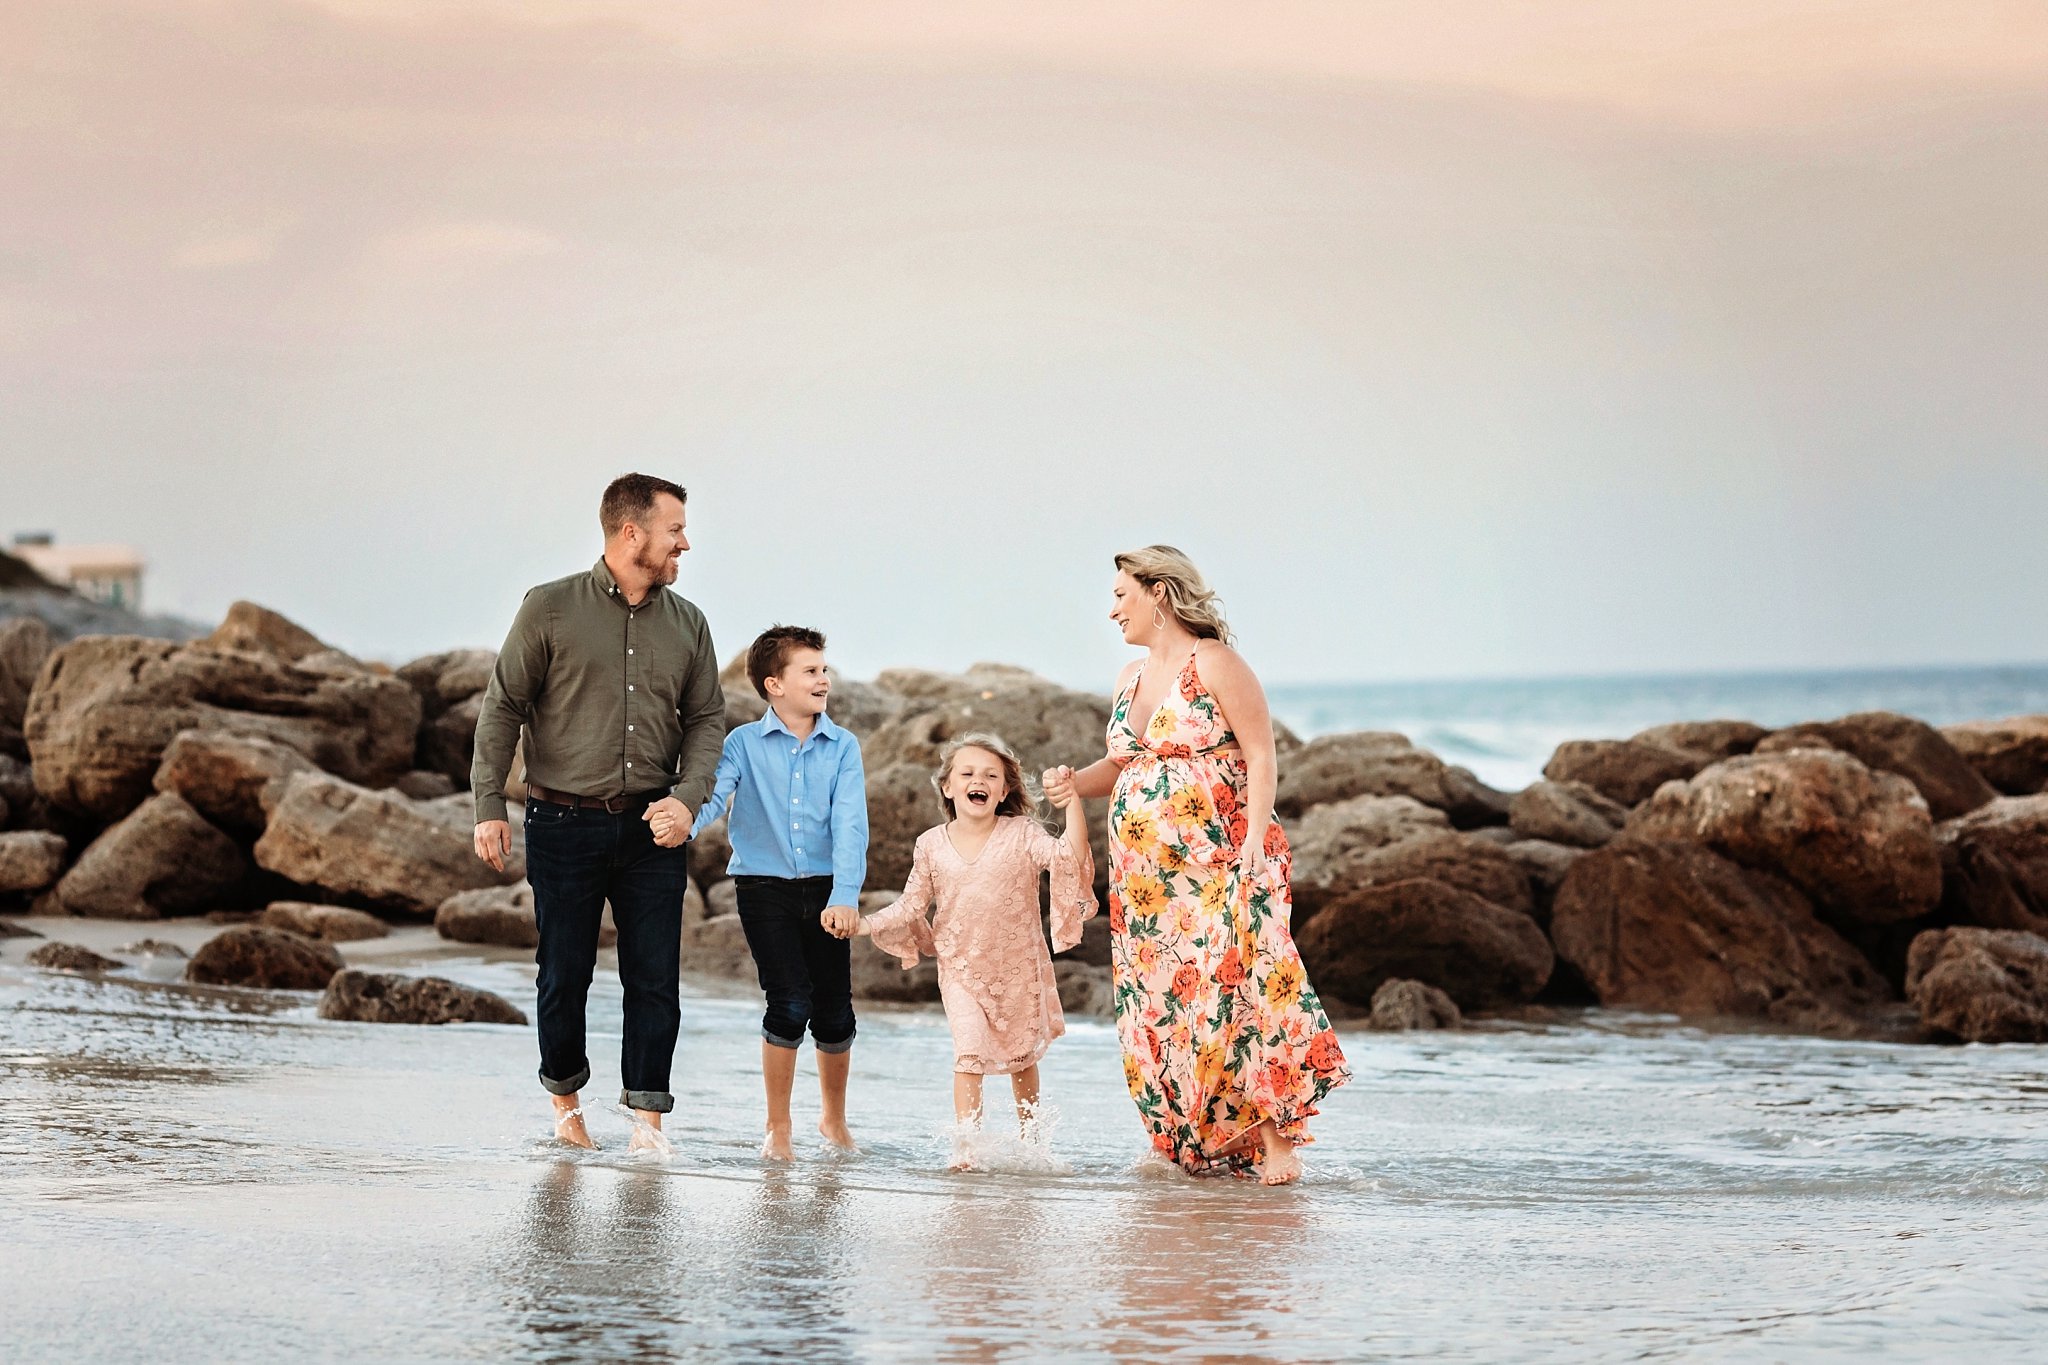 St Augustine Maternity Photographer Washington Oaks Gardens State Park family of 4 walking in the waves with pink sky and rocky beacg behind them